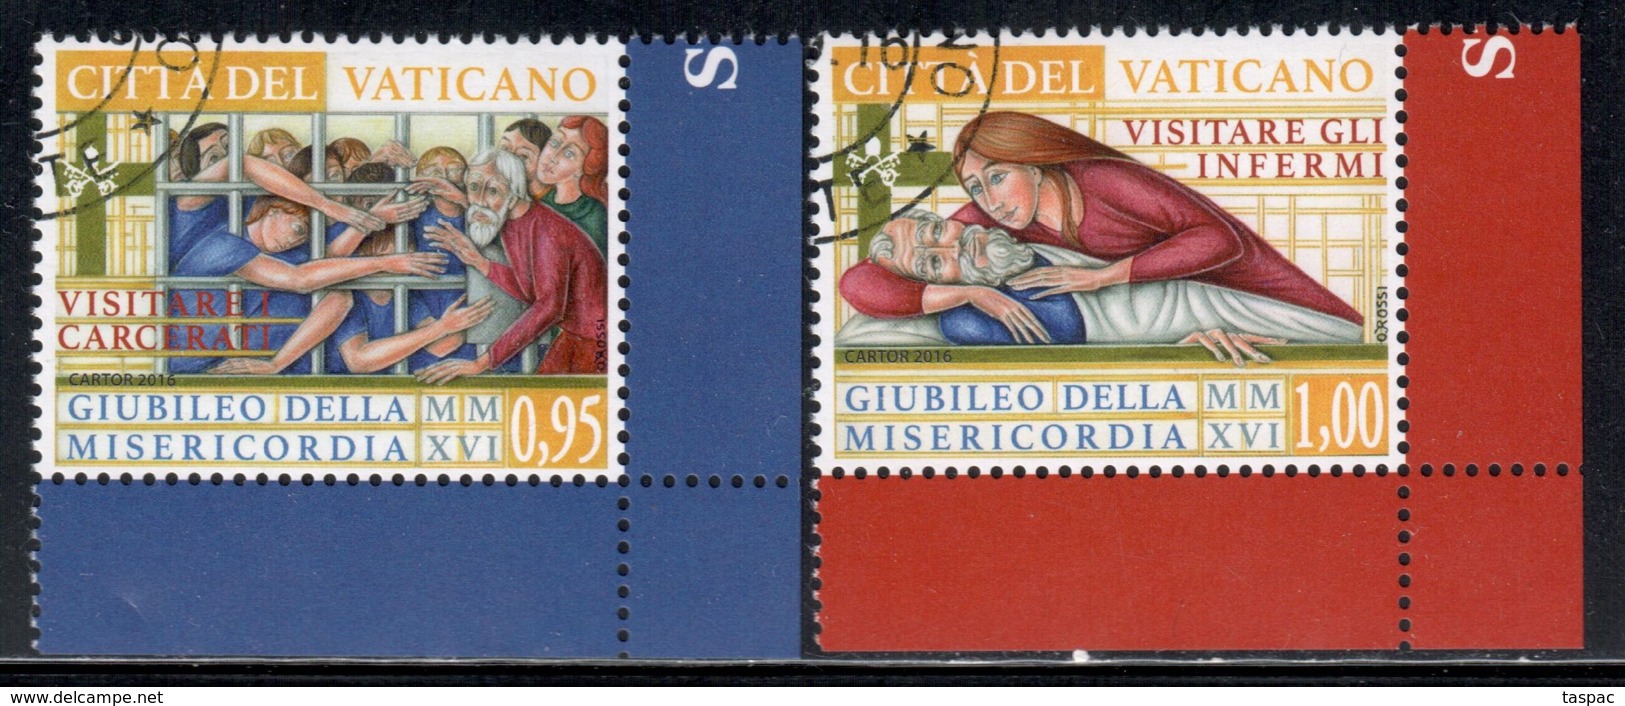 Vatican 2016 Mi# 1880-1881 Used - Jubilee Of Mercy (IV) - Used Stamps